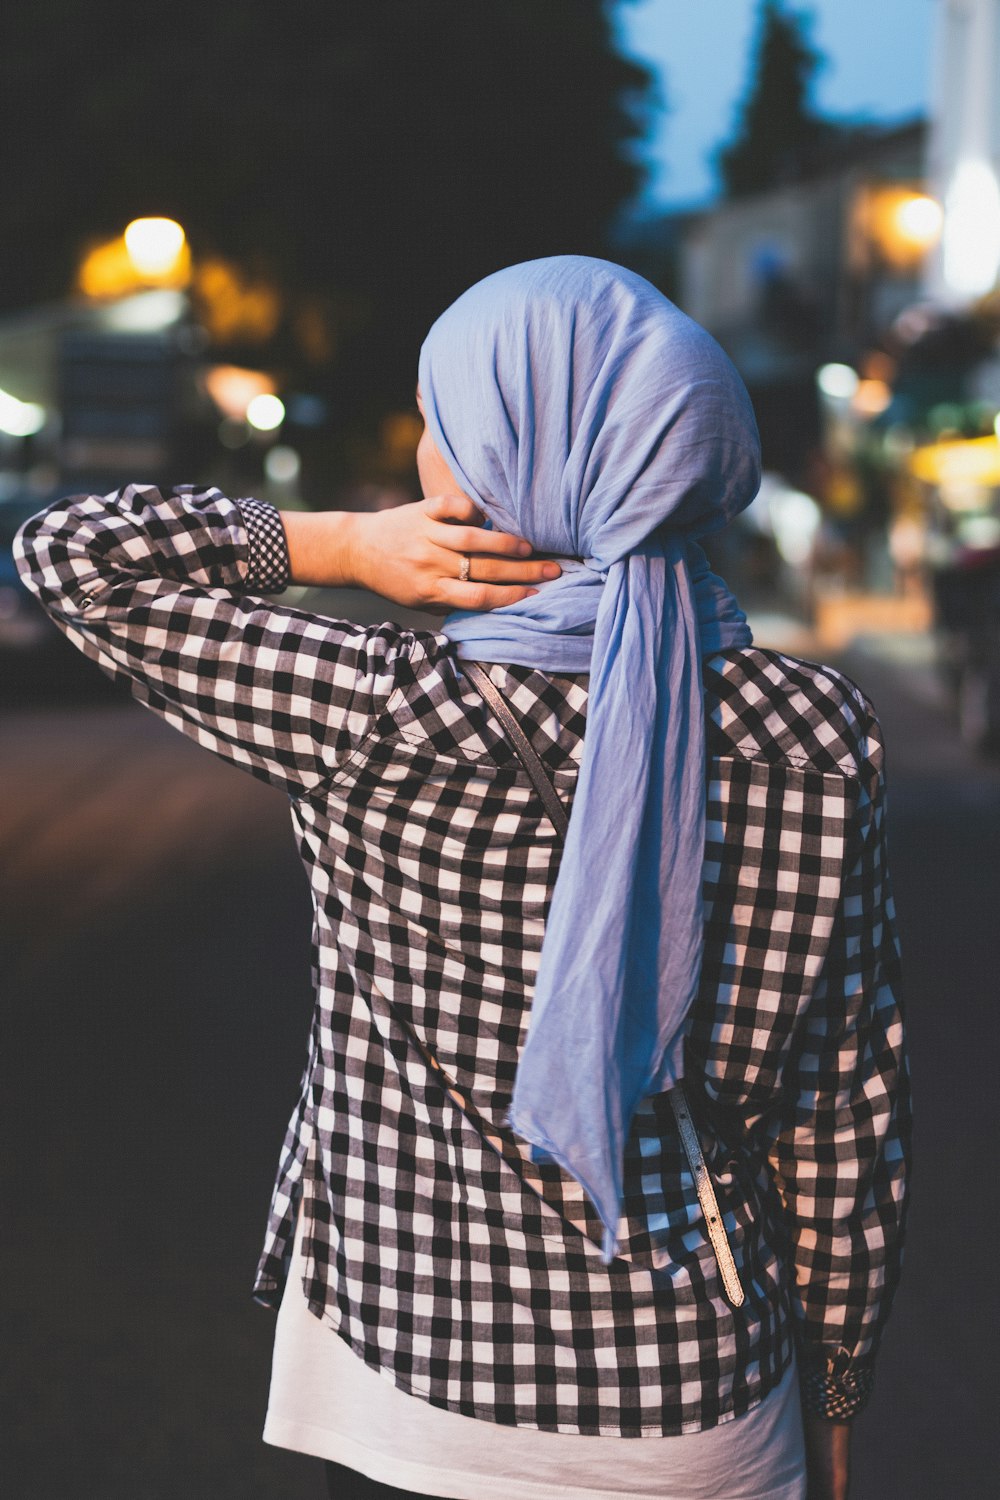 selective focus photograph of person wearing blue headscarf